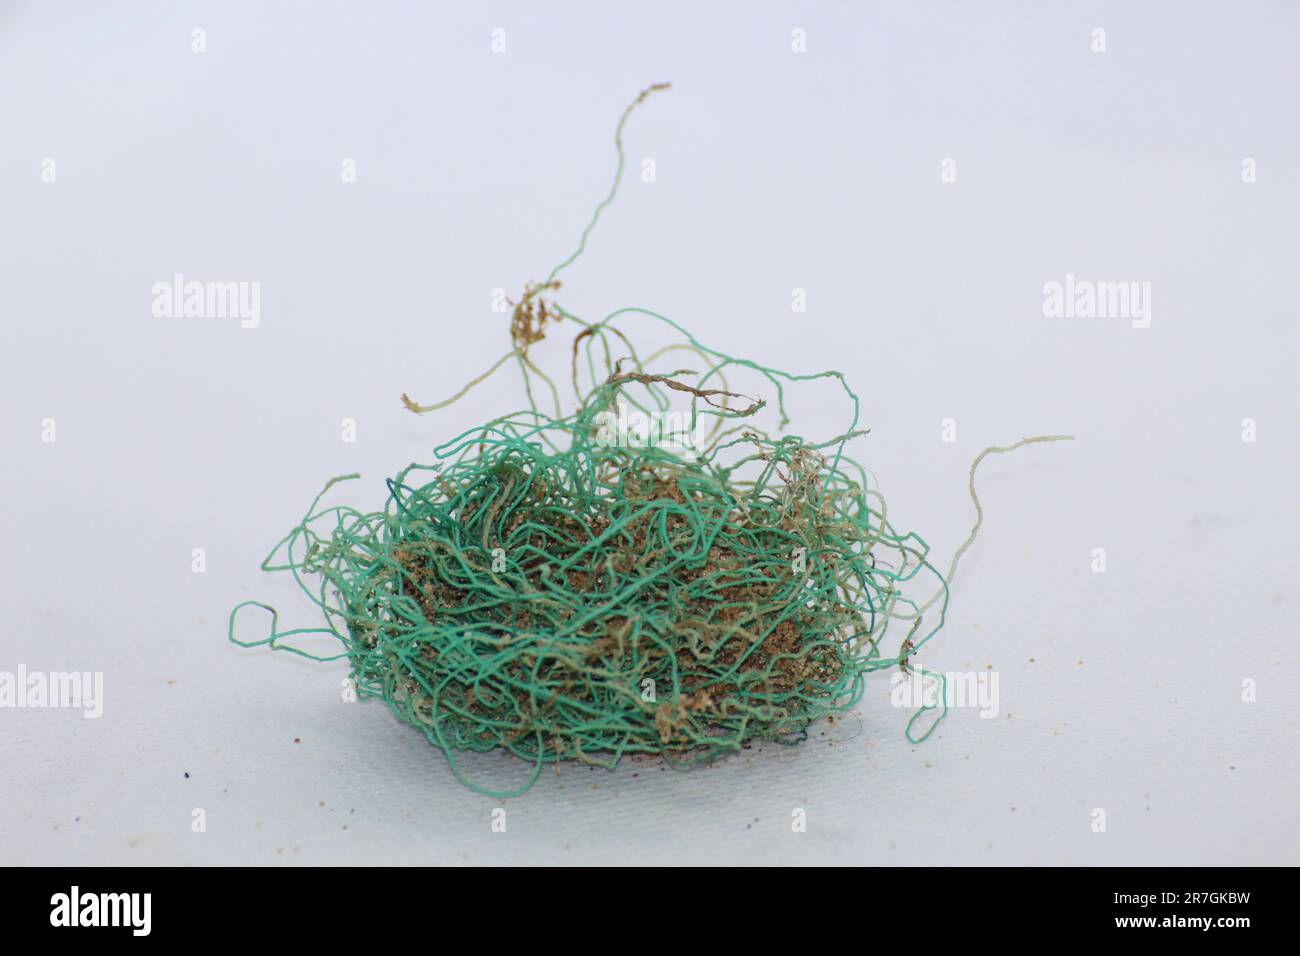 Long green knotted fishing line washed up ashore Stock Photo